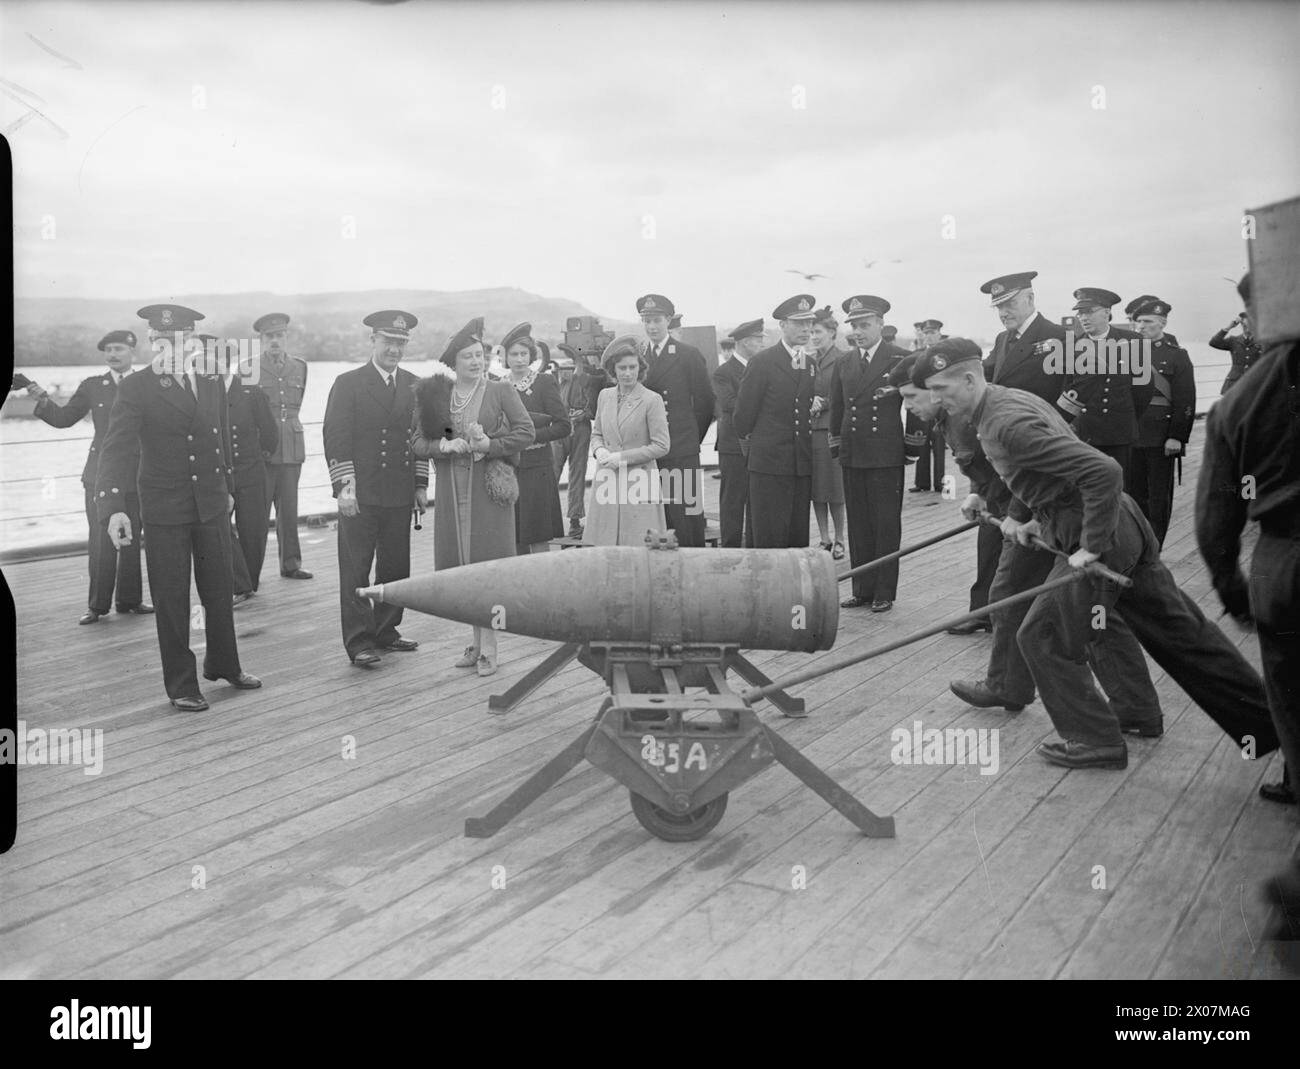 ROYAL VISIT TO HMS KING GEORGE V. 29 OCTOBER 1944, GREENOCK. THE KING AND QUEEN ACCOMPANIED BY PRINCESS ELIZABETH AND PRINCESS MARGARET PAID A FAREWELL VISIT TO THE BATTLESHIP HMS KING GEORGE V BEFORE SHE LEFT TO JOIN BRITAIN'S EAST INDIES FLEET. - The royal party watching a 14-inch shell being wheeled across the quarterdeck of the battleship Stock Photo